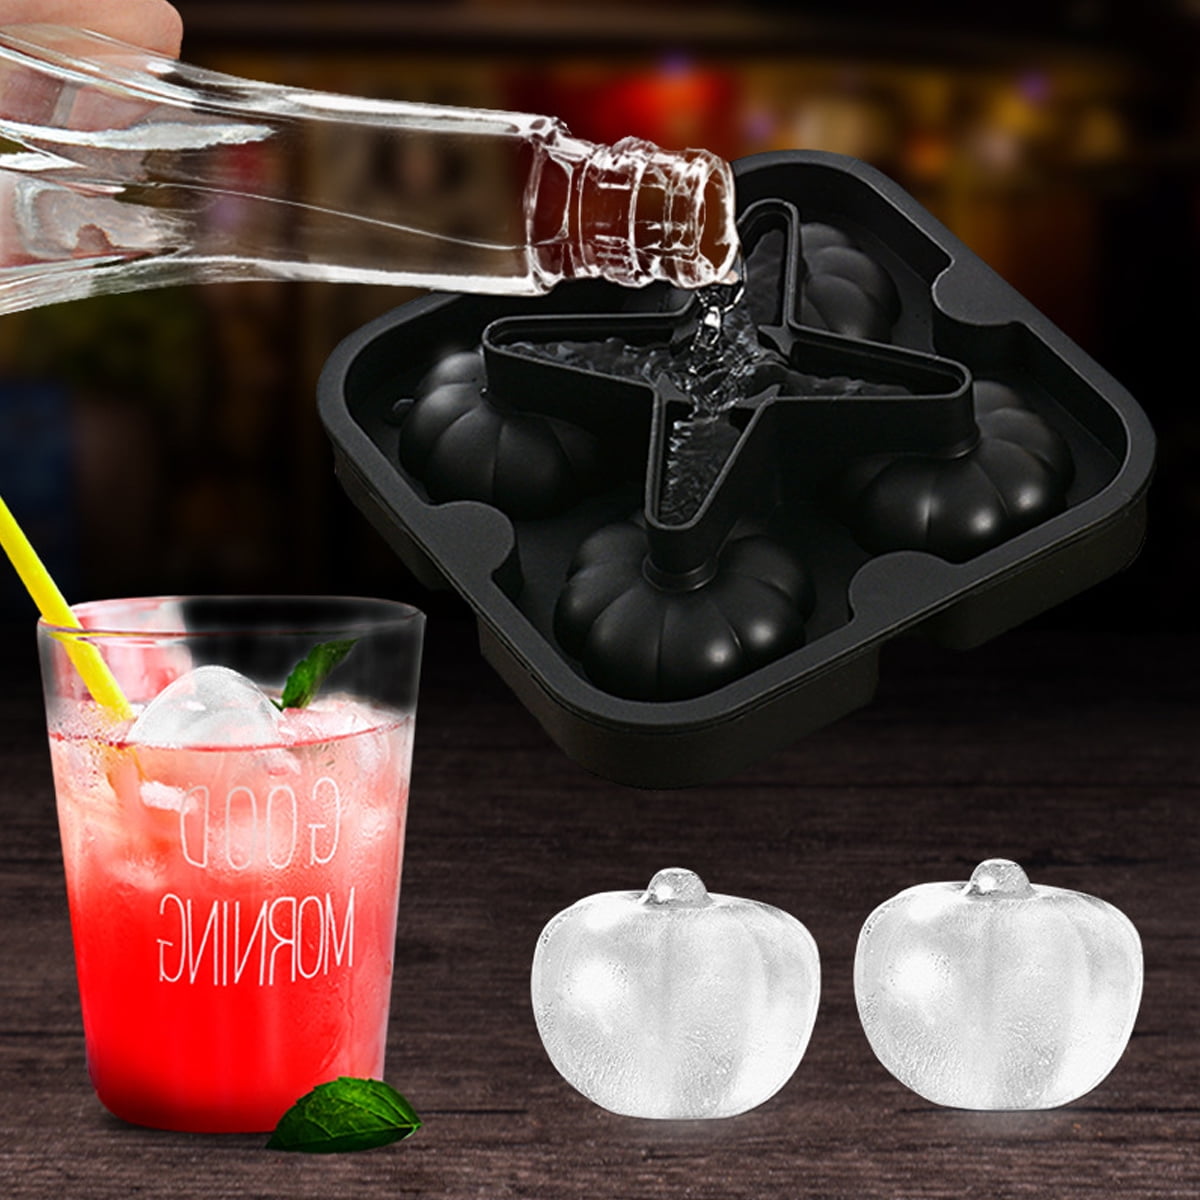 Pumpkin Shaped Ice Cube Tray With Built In Small Ice Trays for